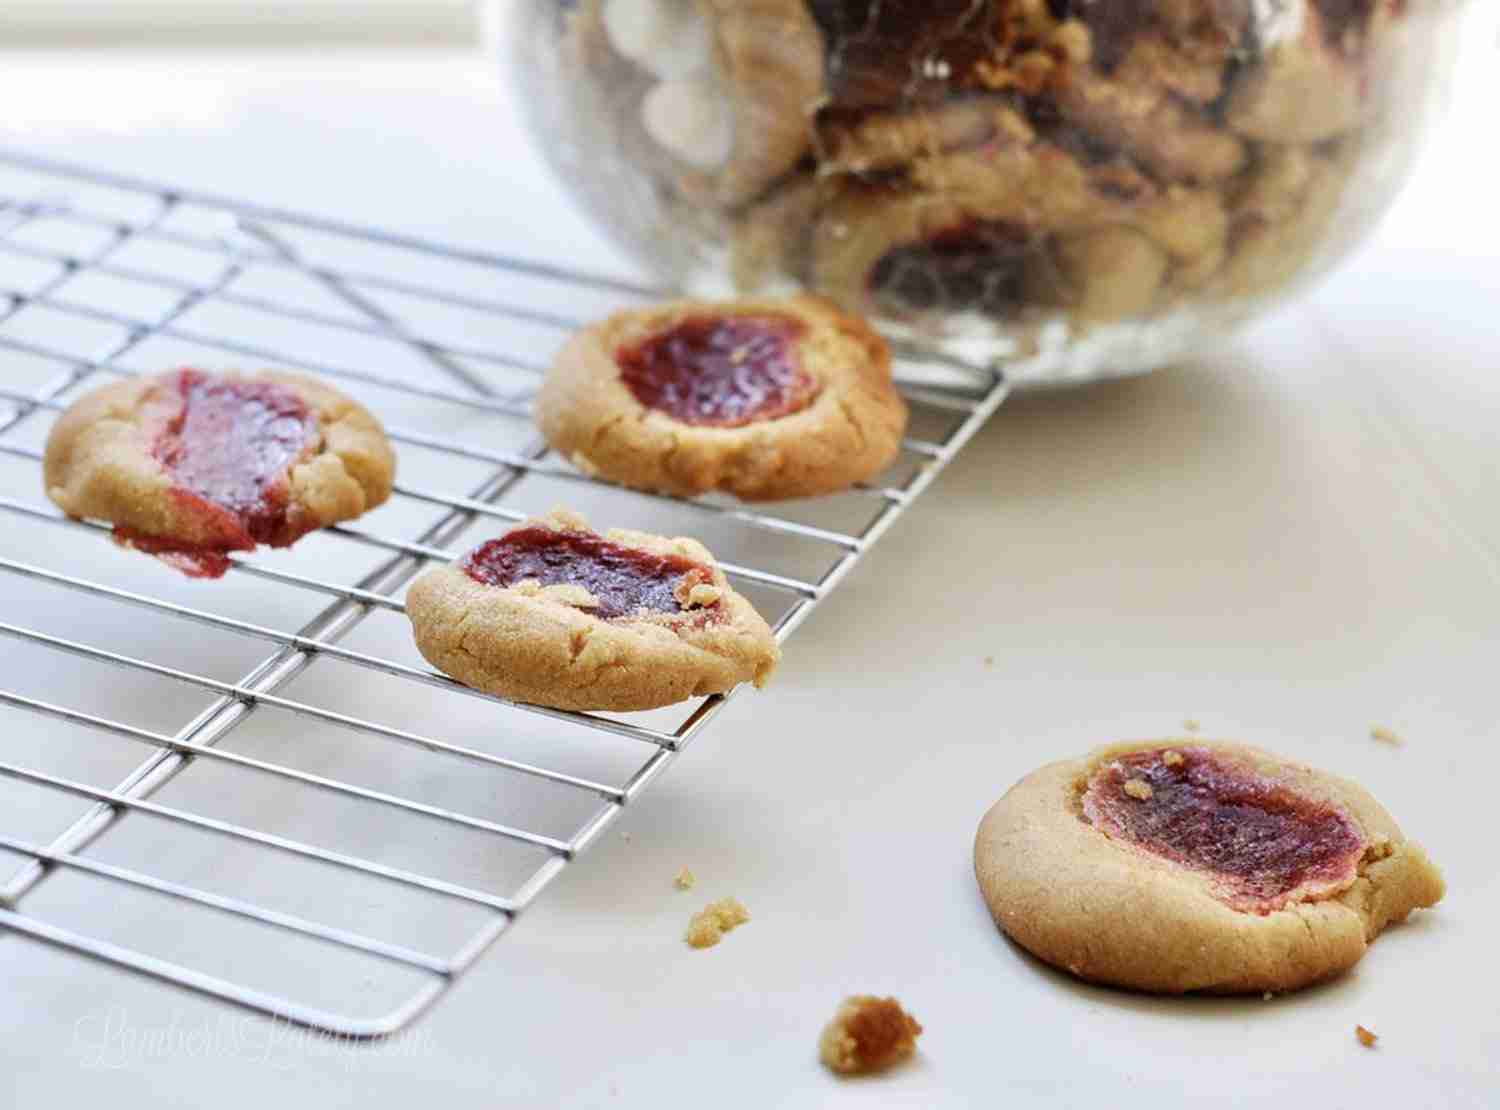 Check out this recipe for peanut butter & jelly thumbprint cookies. Such a fun, easy homemade dessert that's perfect for Christmas - super soft and chewy!